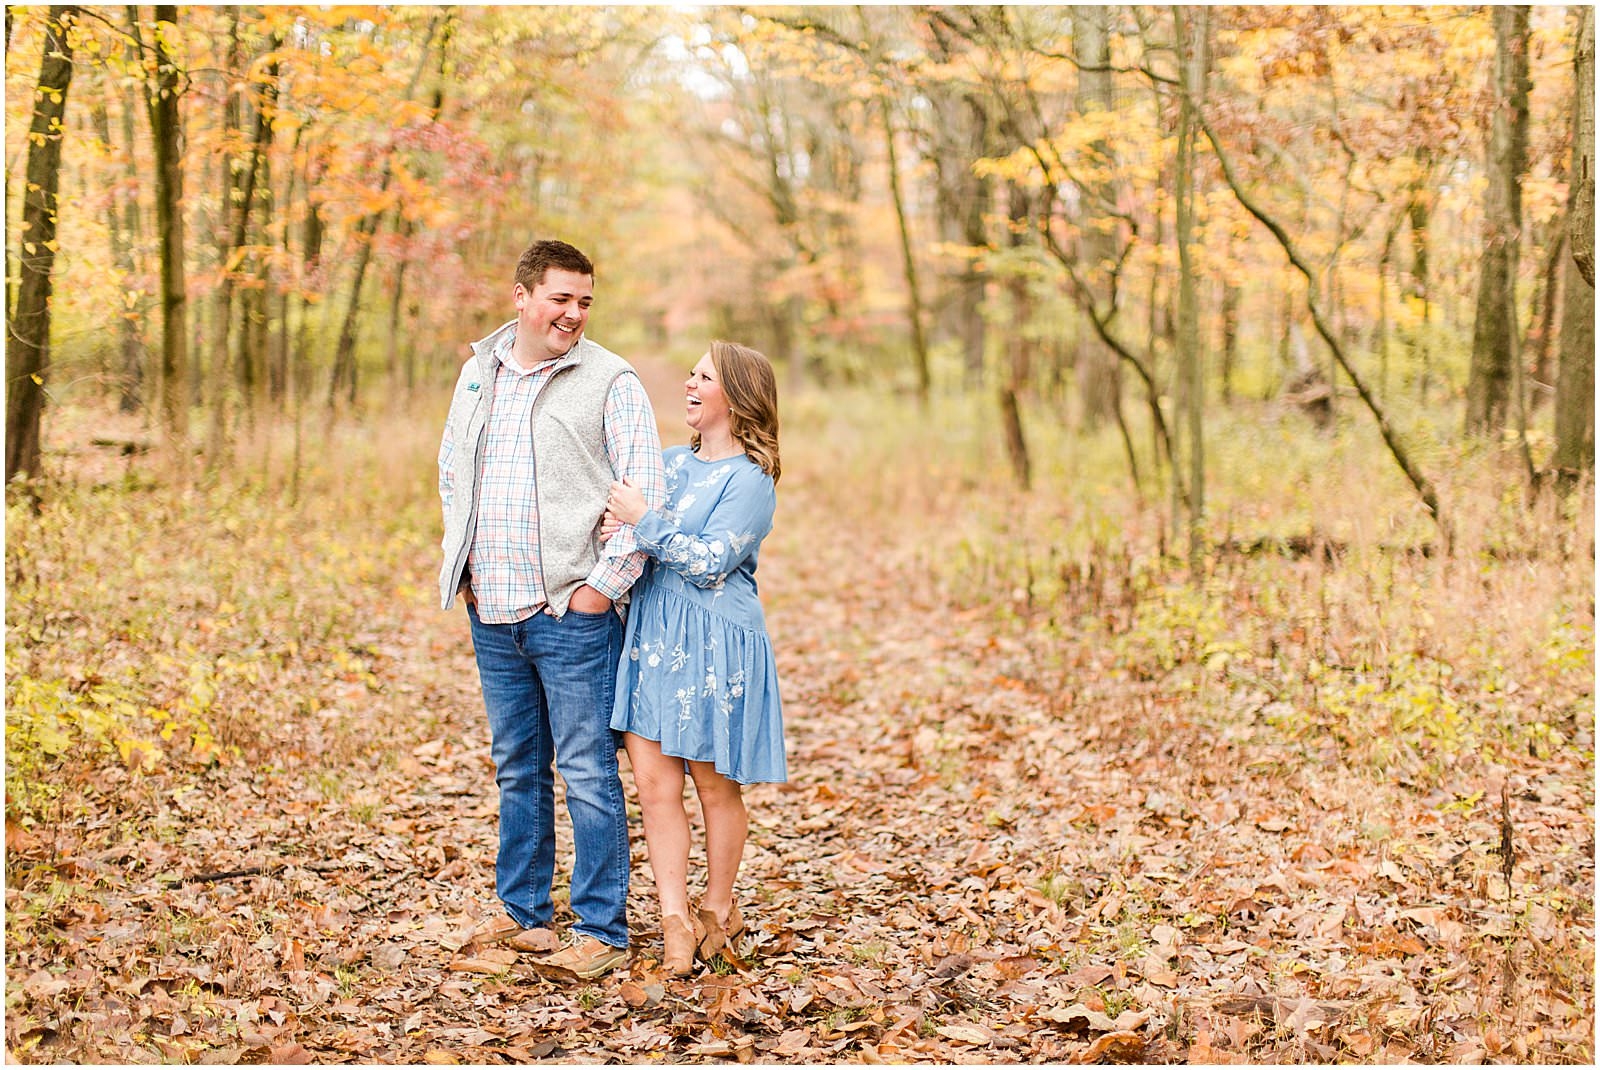 A Southern Illinois Engagement Session | Roxanne and Matthew | Bret and Brandie Photography 0039.jpg